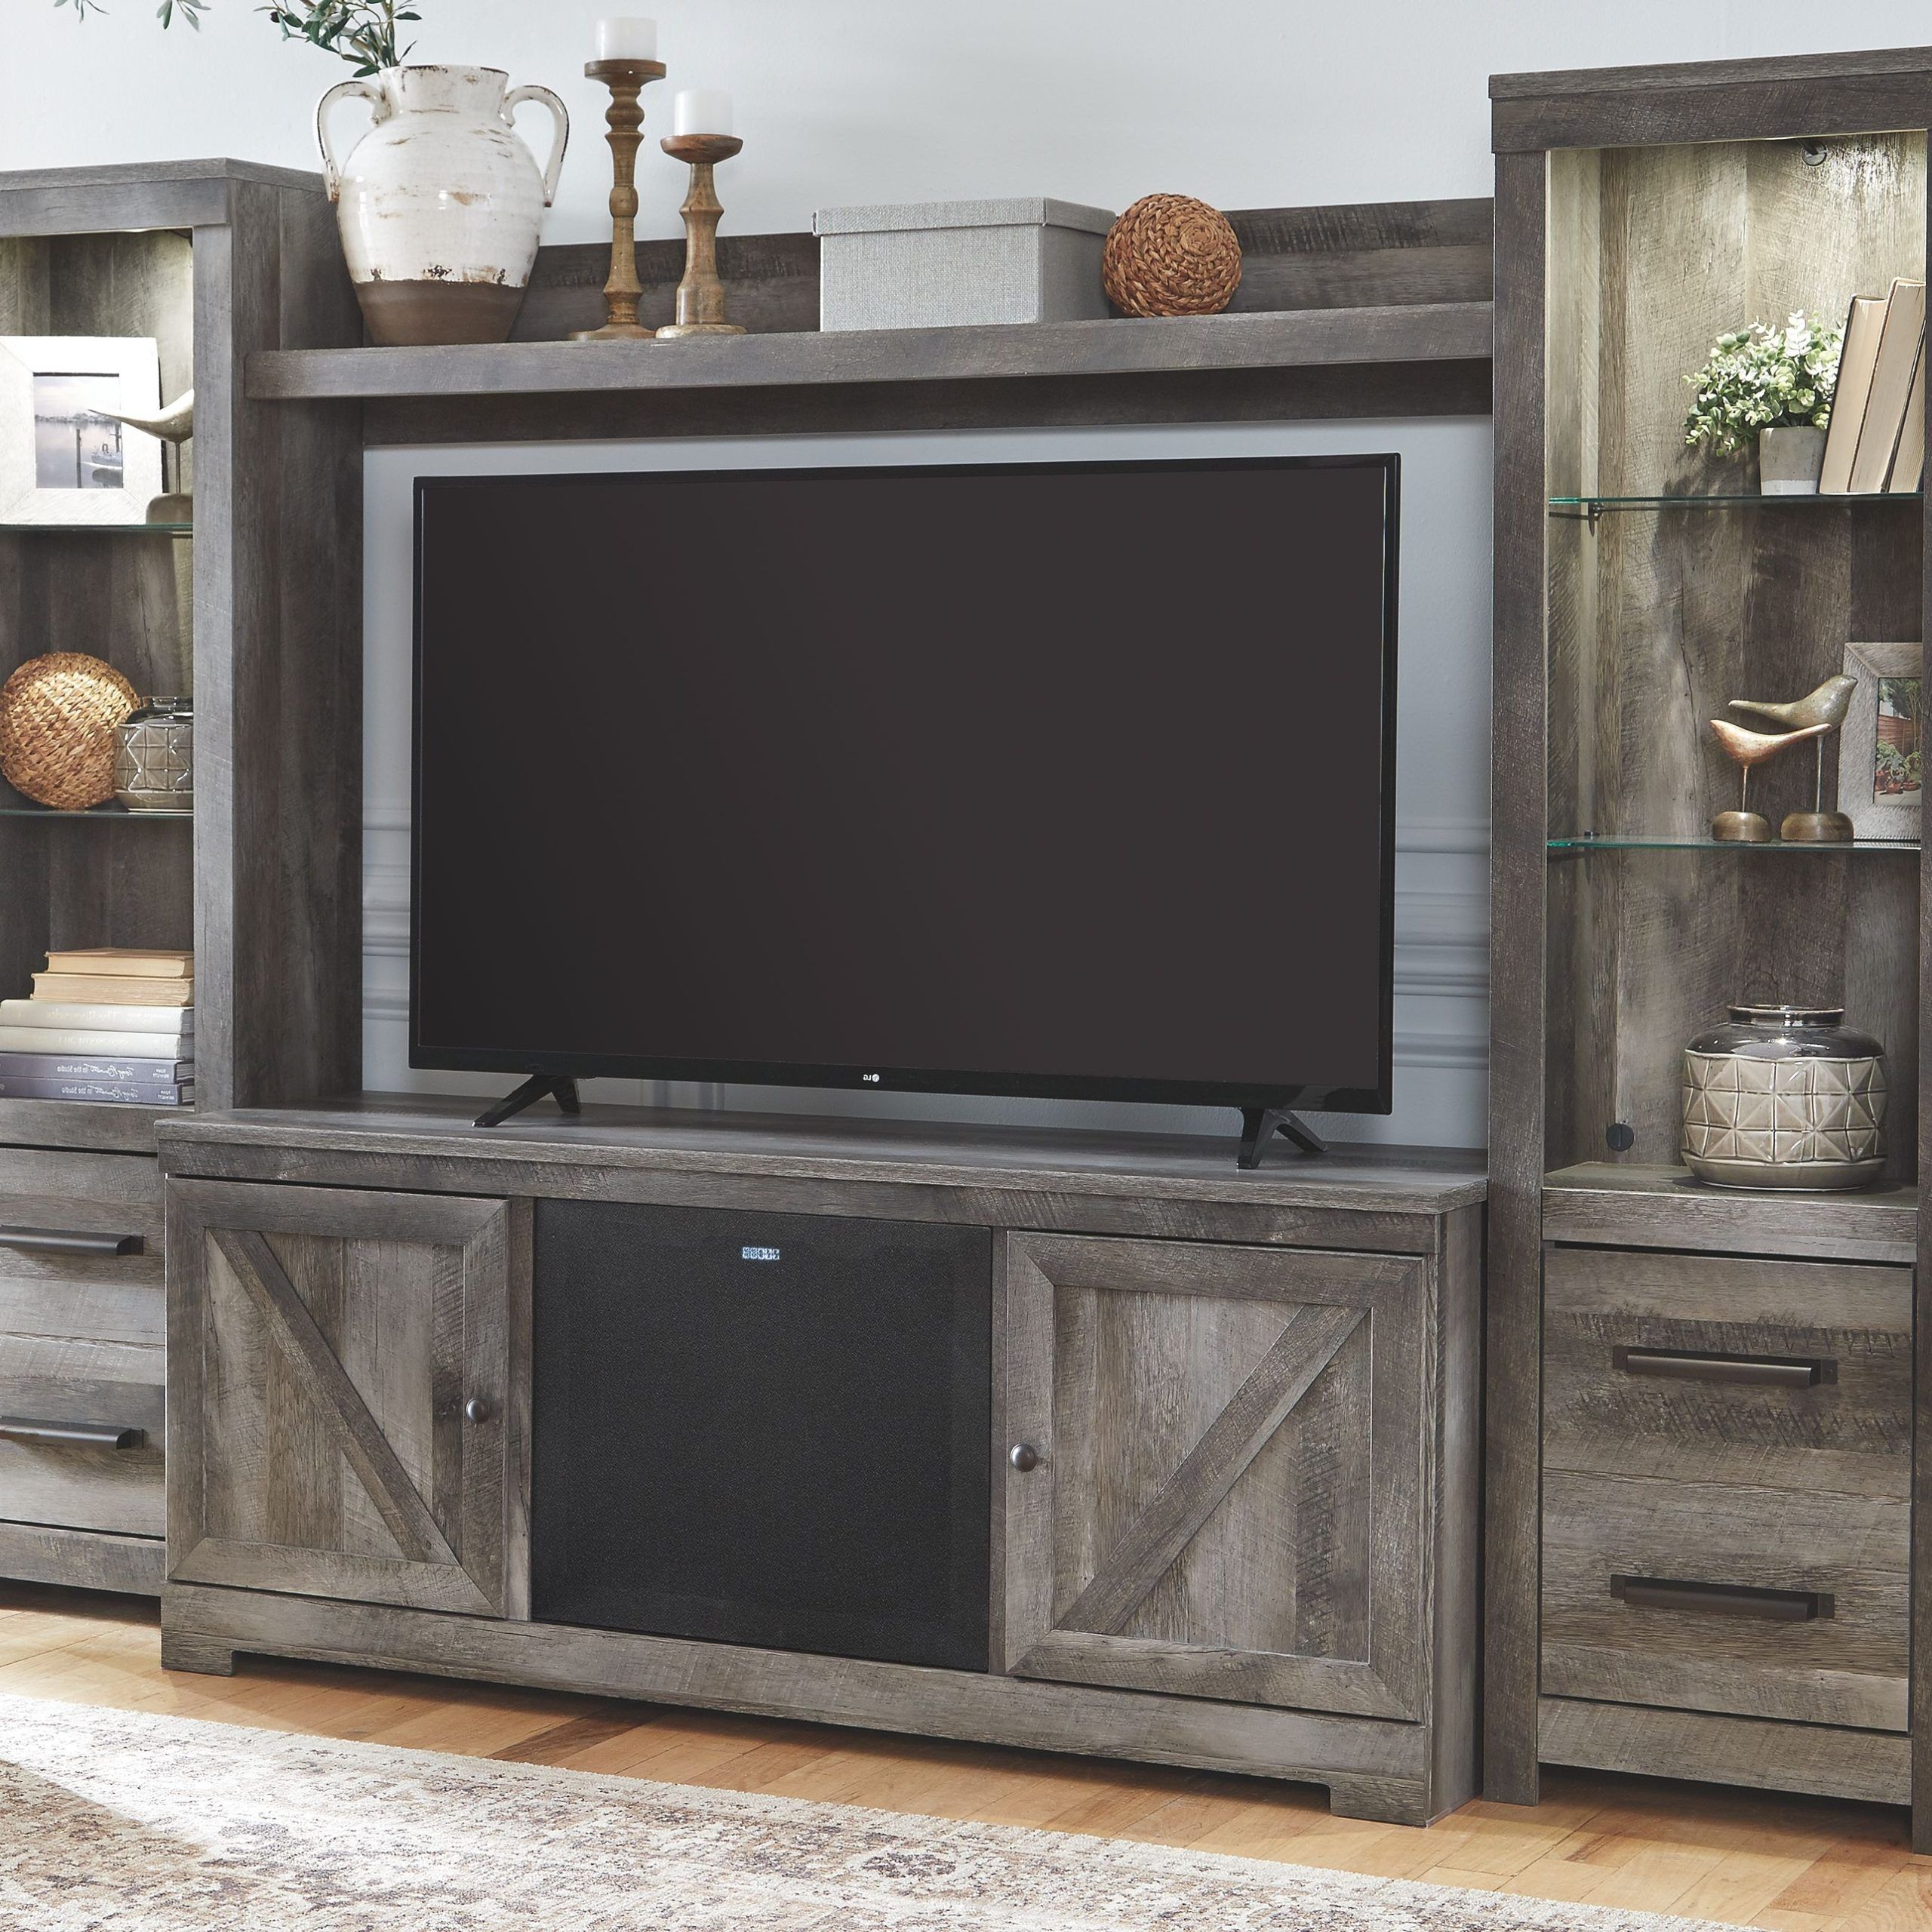 Wynnlow – Gray – Entertainment Center – Lg Tv Stand, 2 Piers, Bridge Within 2019 Entertainment Units With Bridge (View 3 of 15)